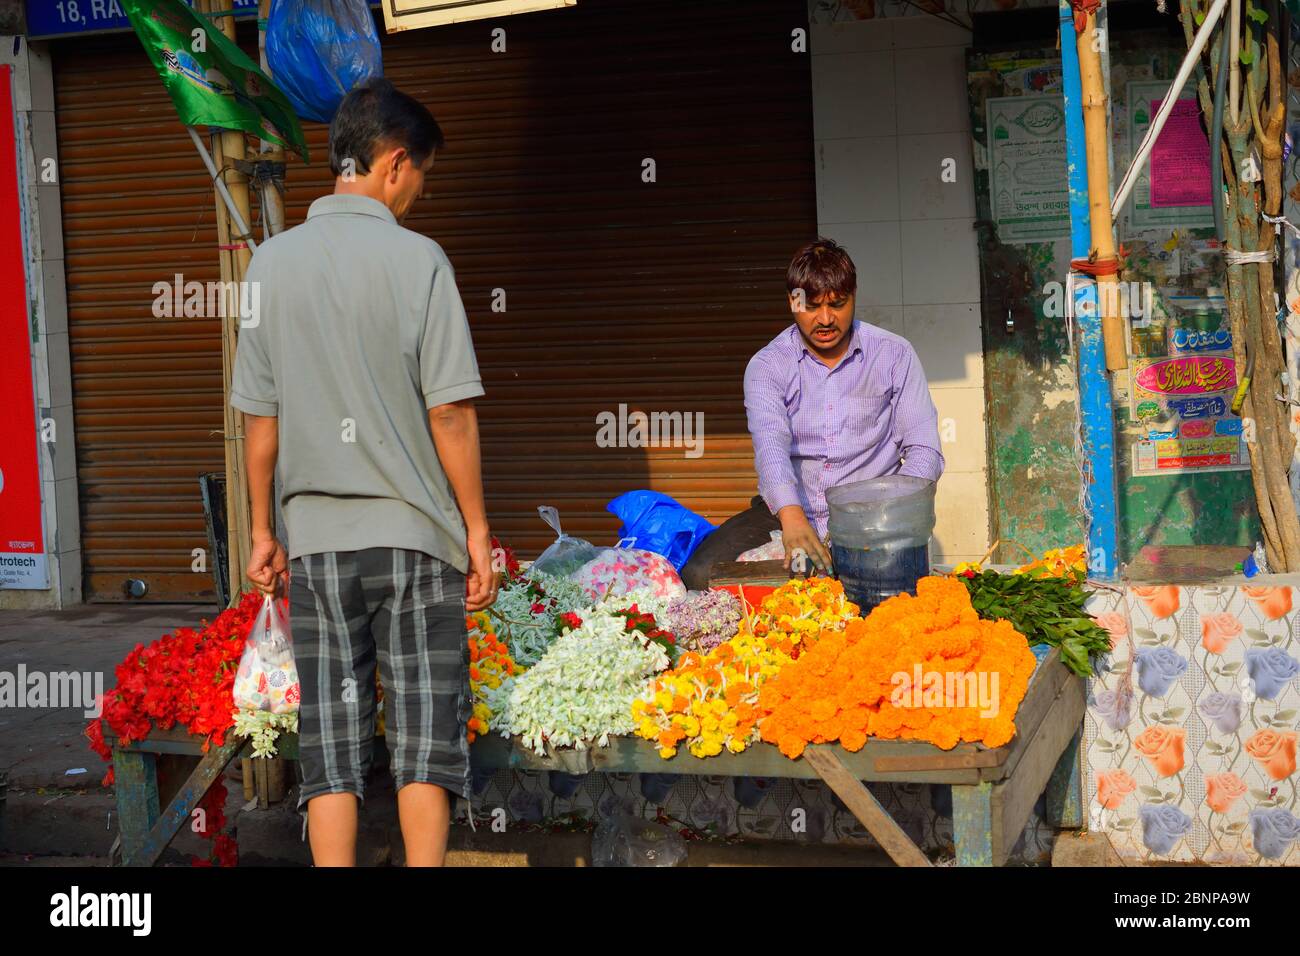 A man selling flowers by the roadside Stock Photo